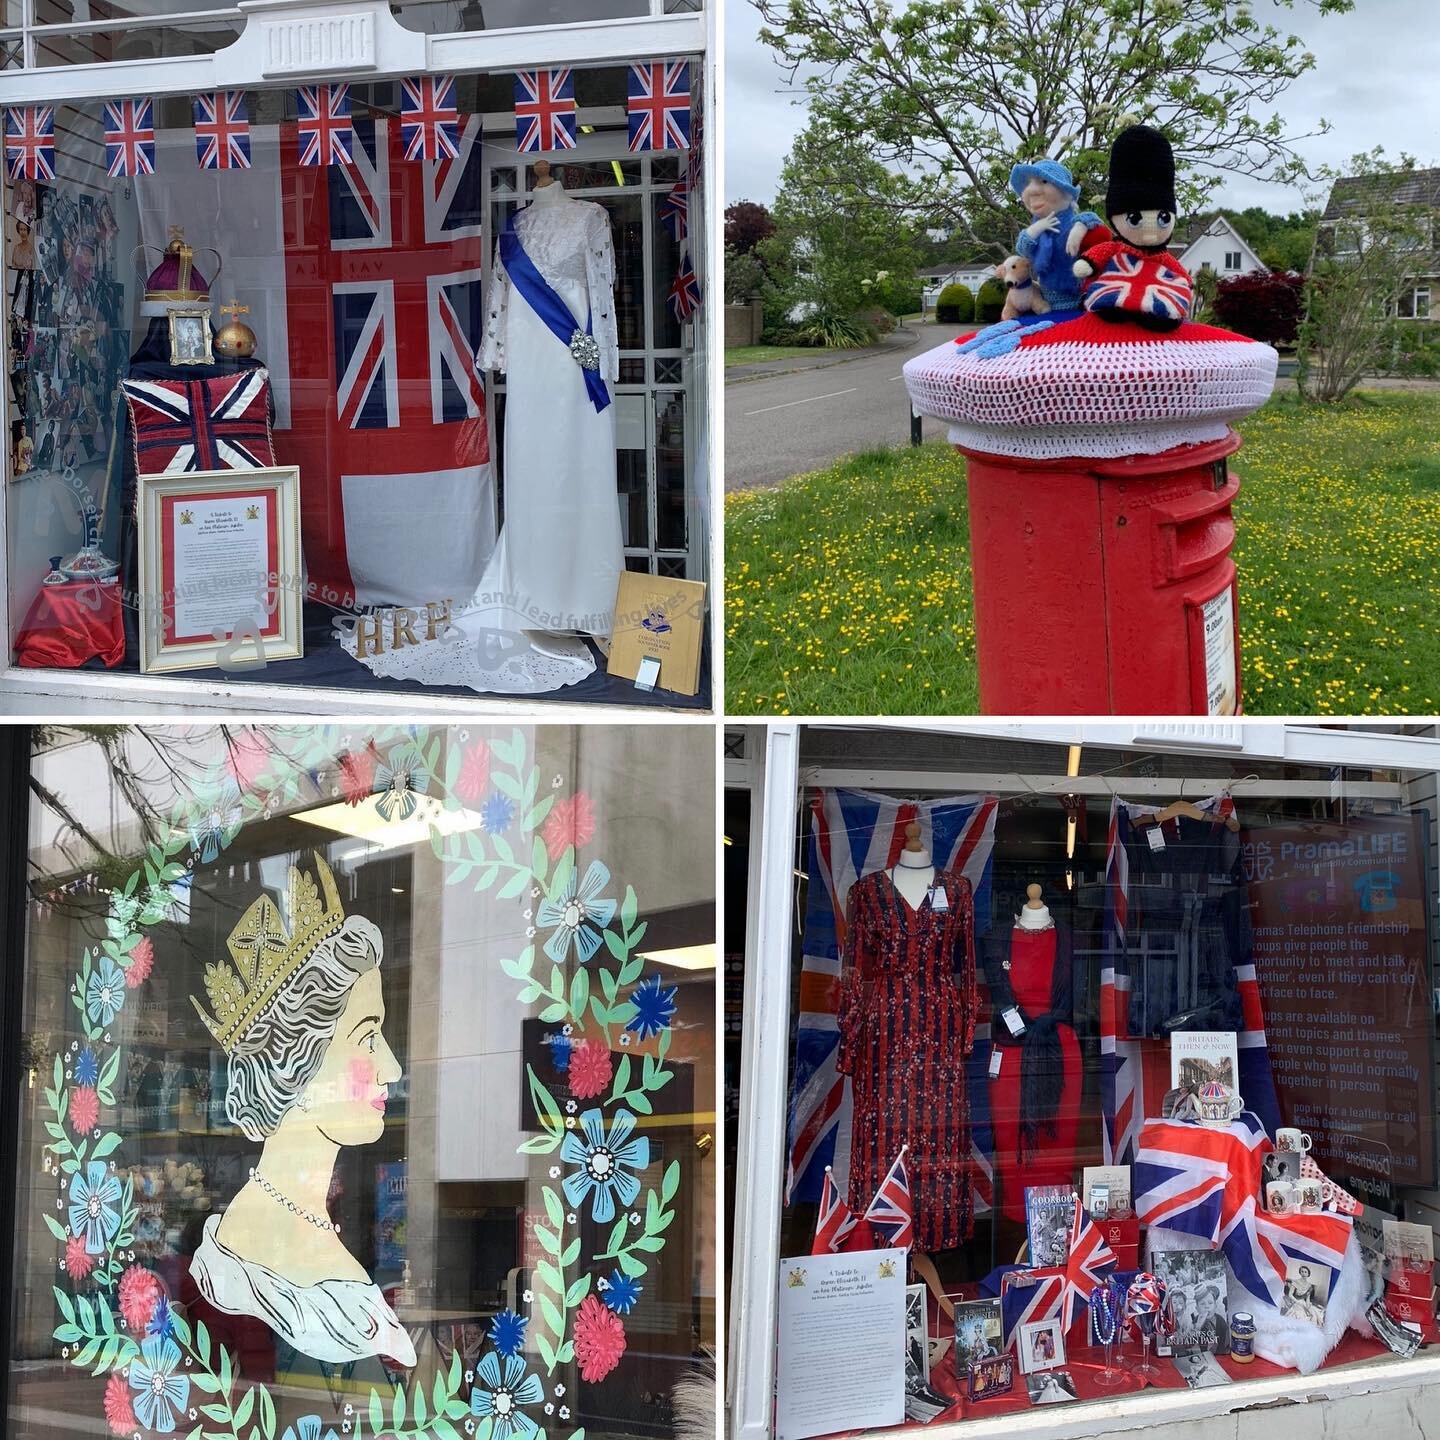 Wishing you all a happy and joyous platinum jubilee 🇬🇧 👑 🎉 so lovely to see the bunting and window displays around town 

#poole #lovepoole #lovepooleuk #platinumjubilee #queenelizabeth #jubilee #poolehighstreet #visitpoole #swisbest #loveforpool